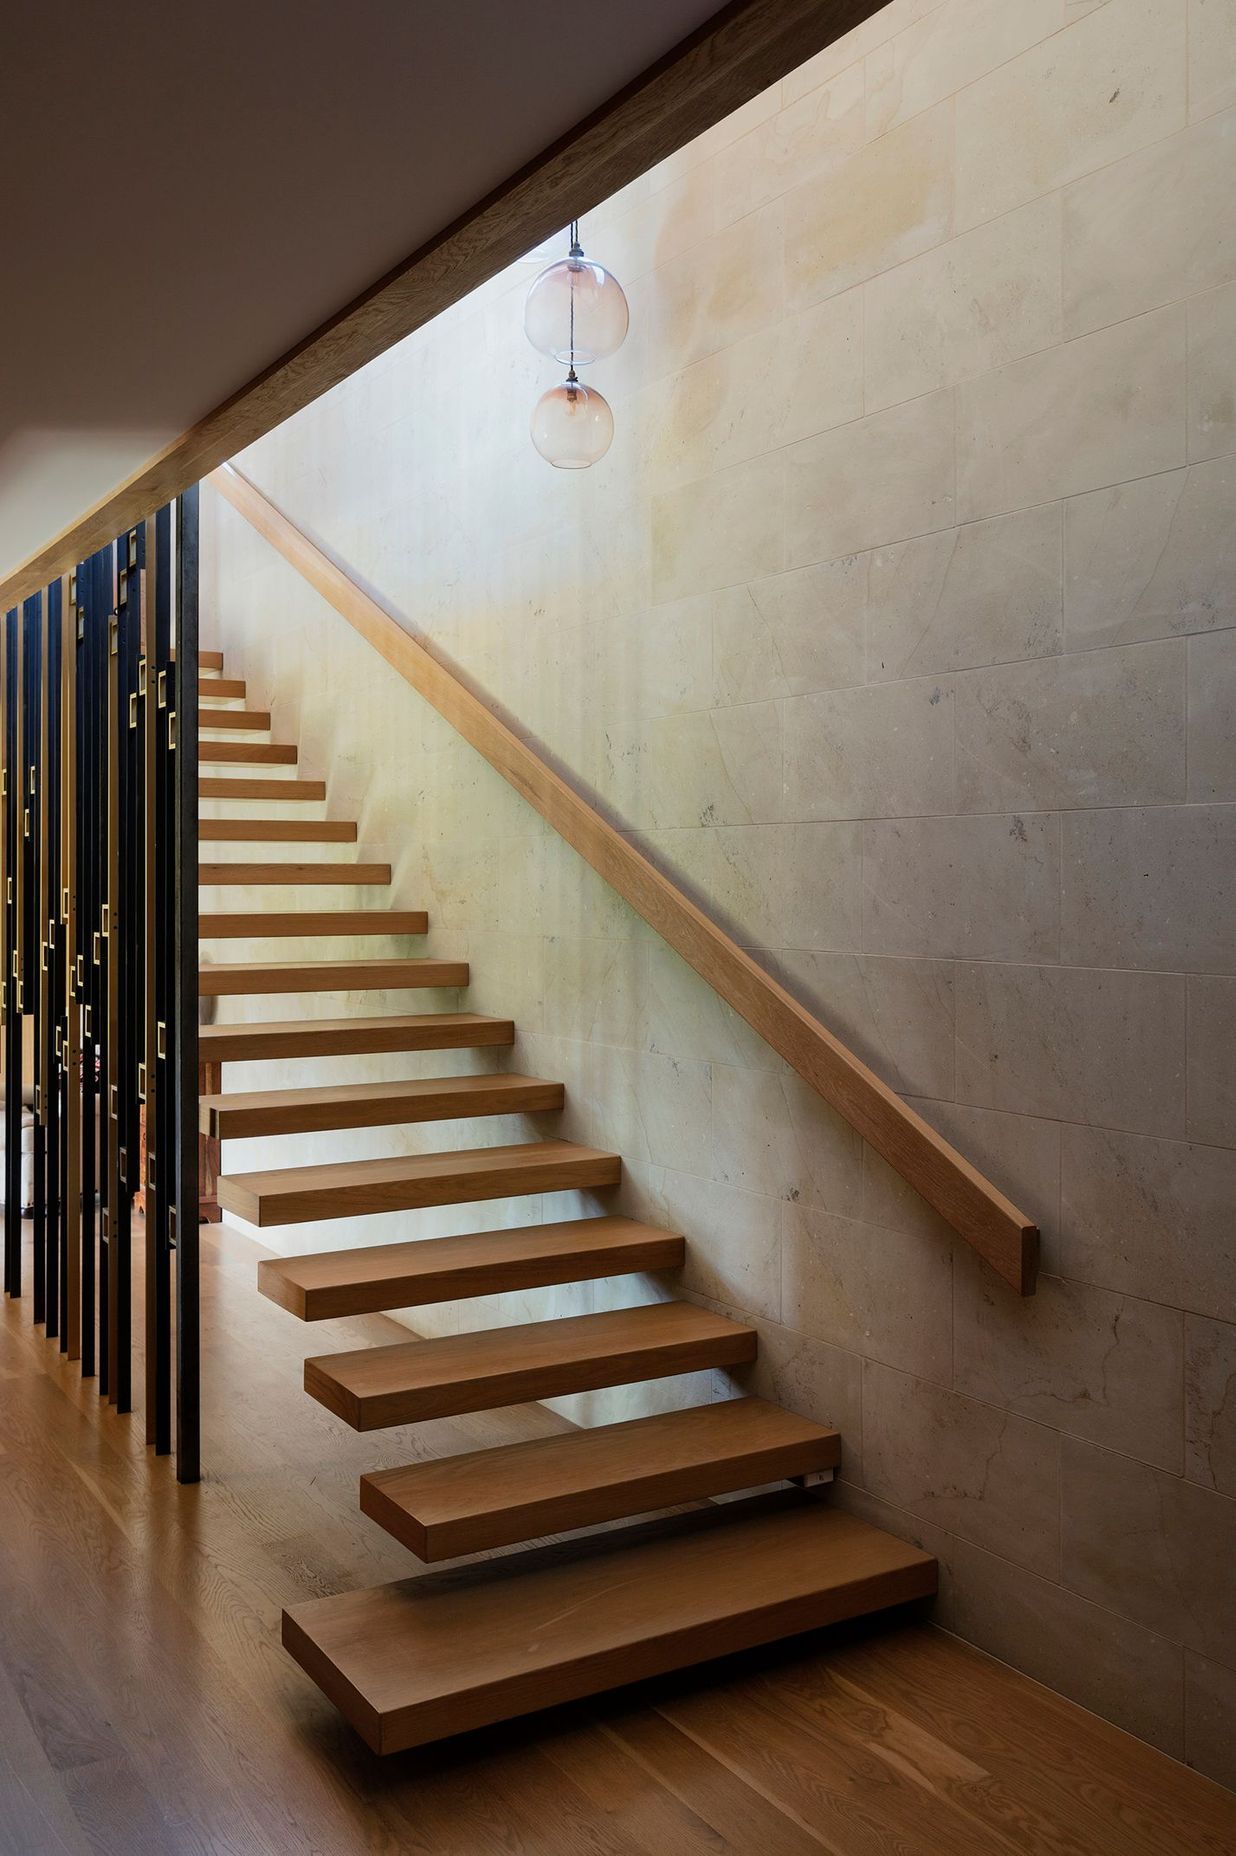 The staircase, with its brass and steel ‘sequin’ screen, sits at the heart of the home.